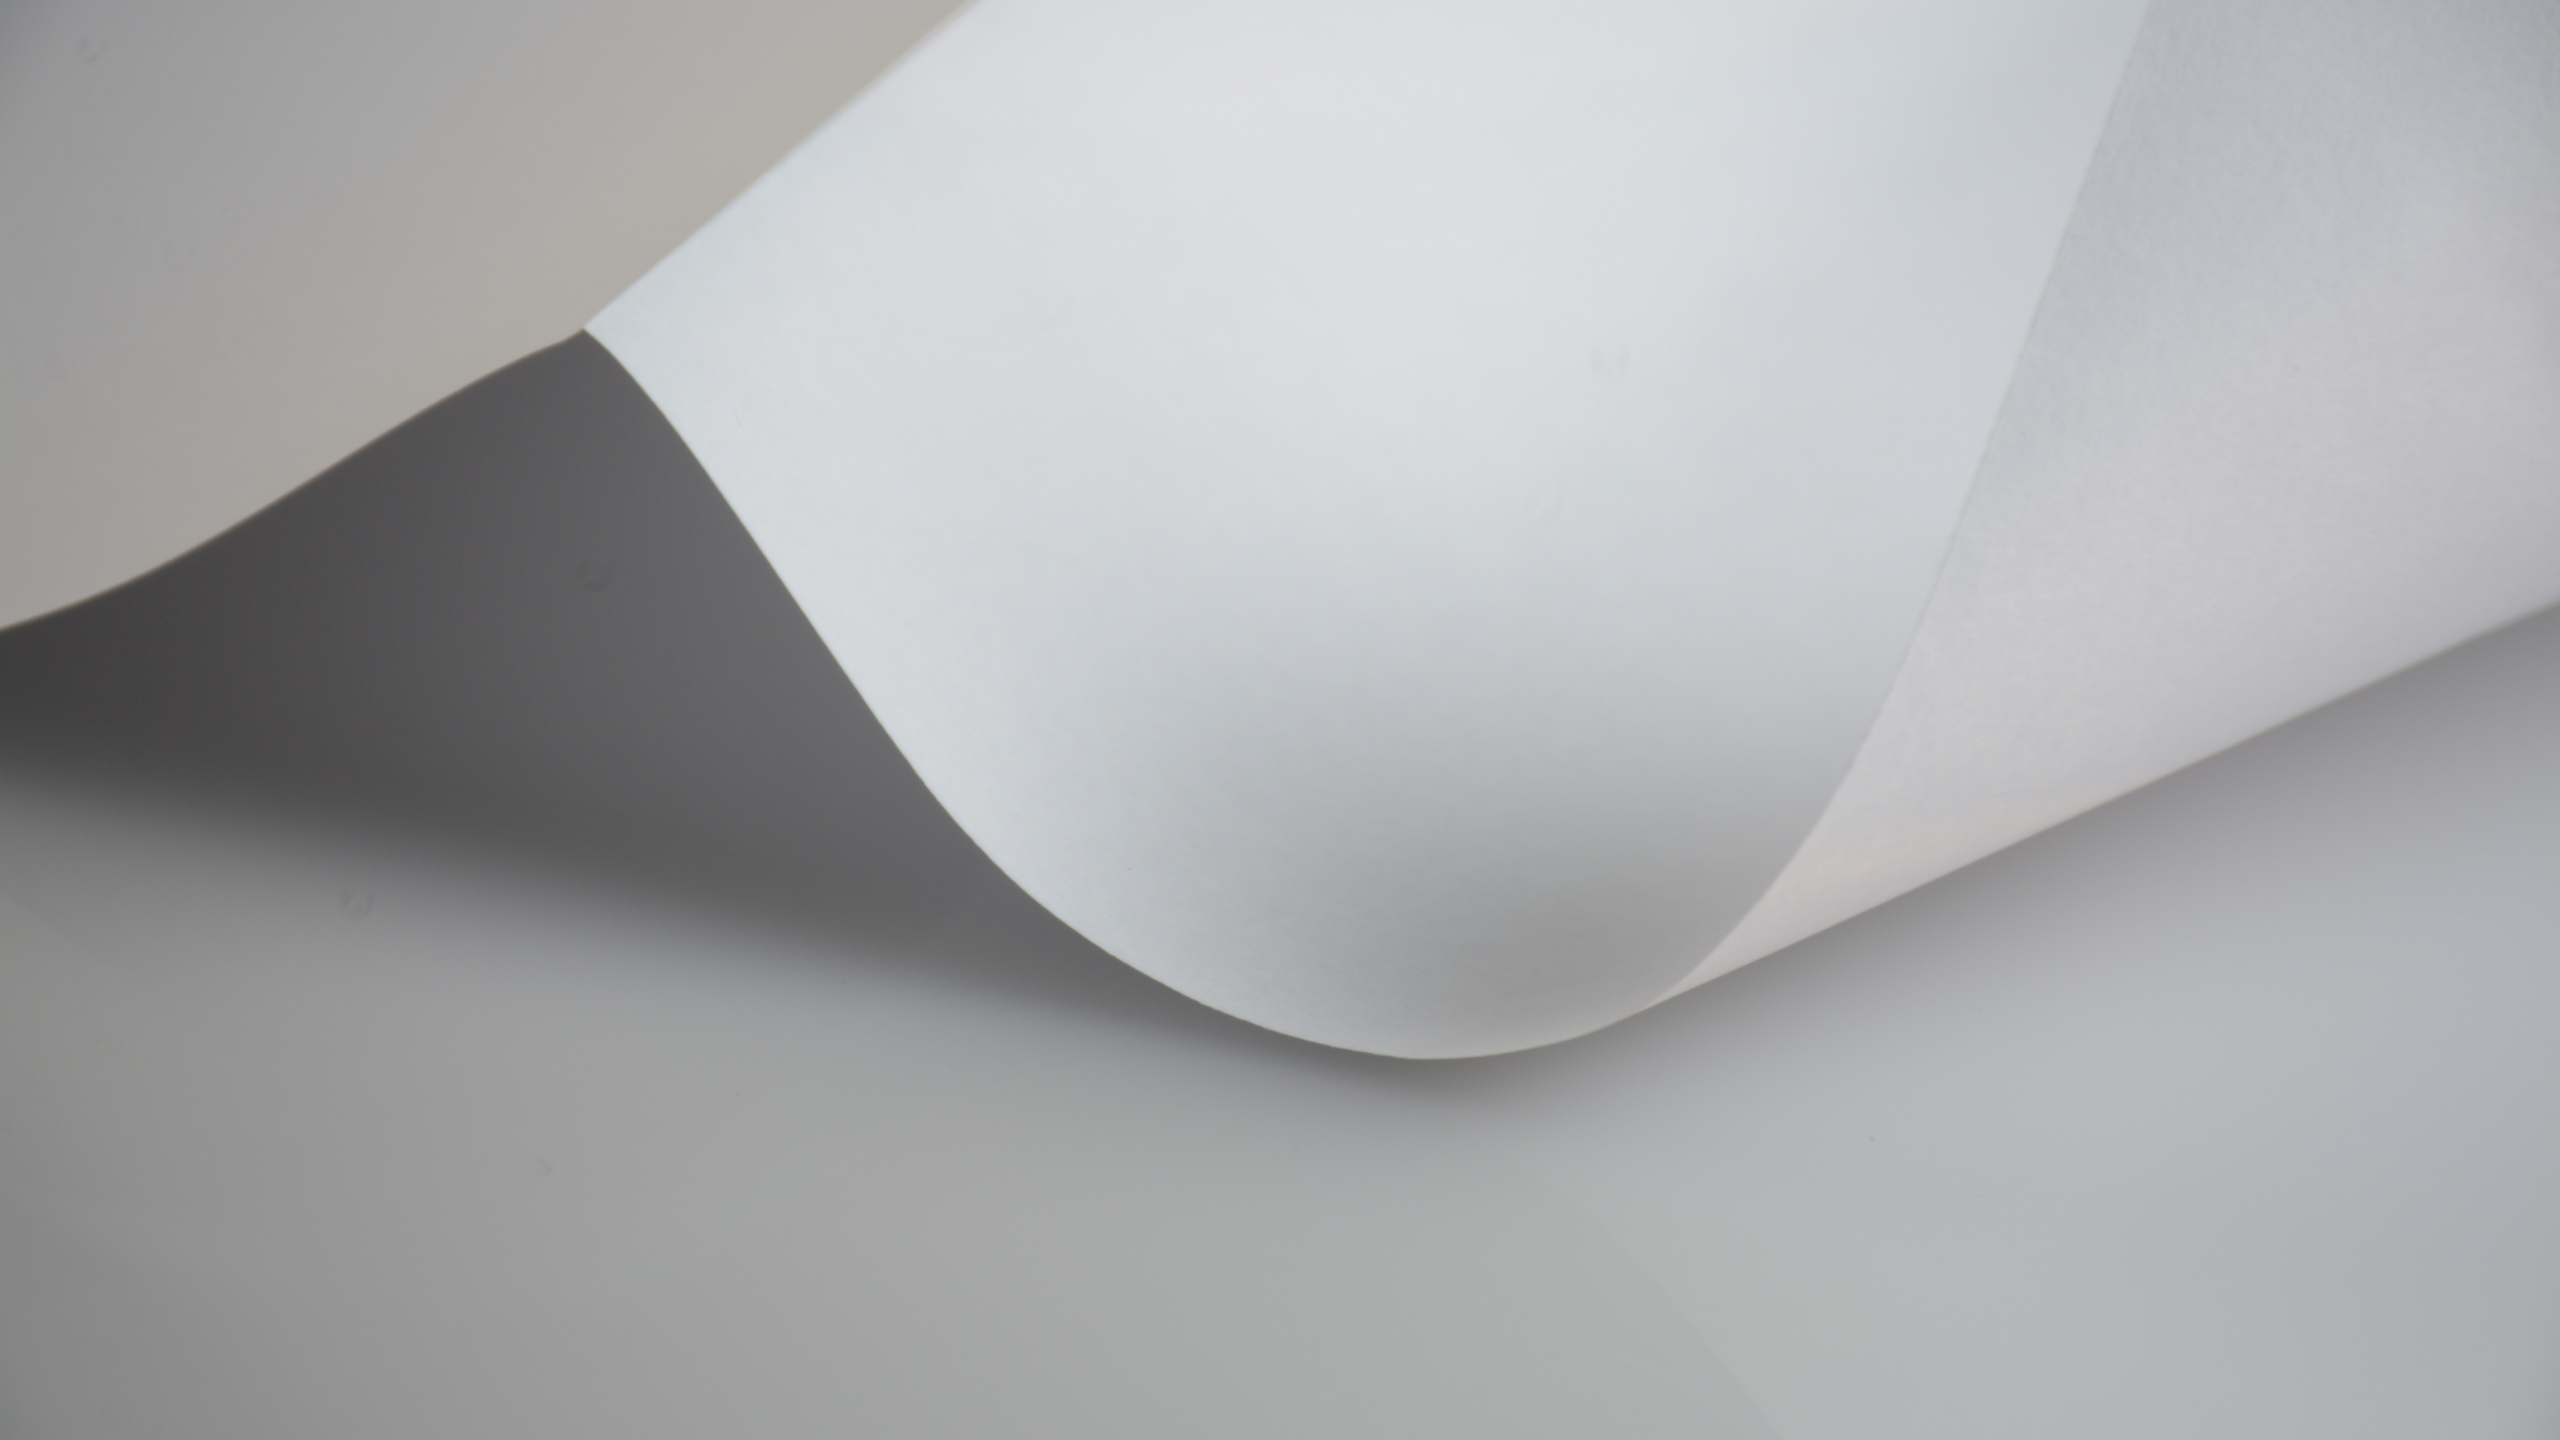 Download Wallpaper 2560x1440 White Paper Simple Minimal Dual Wide 16 9 2560x1440 Hd Background 610